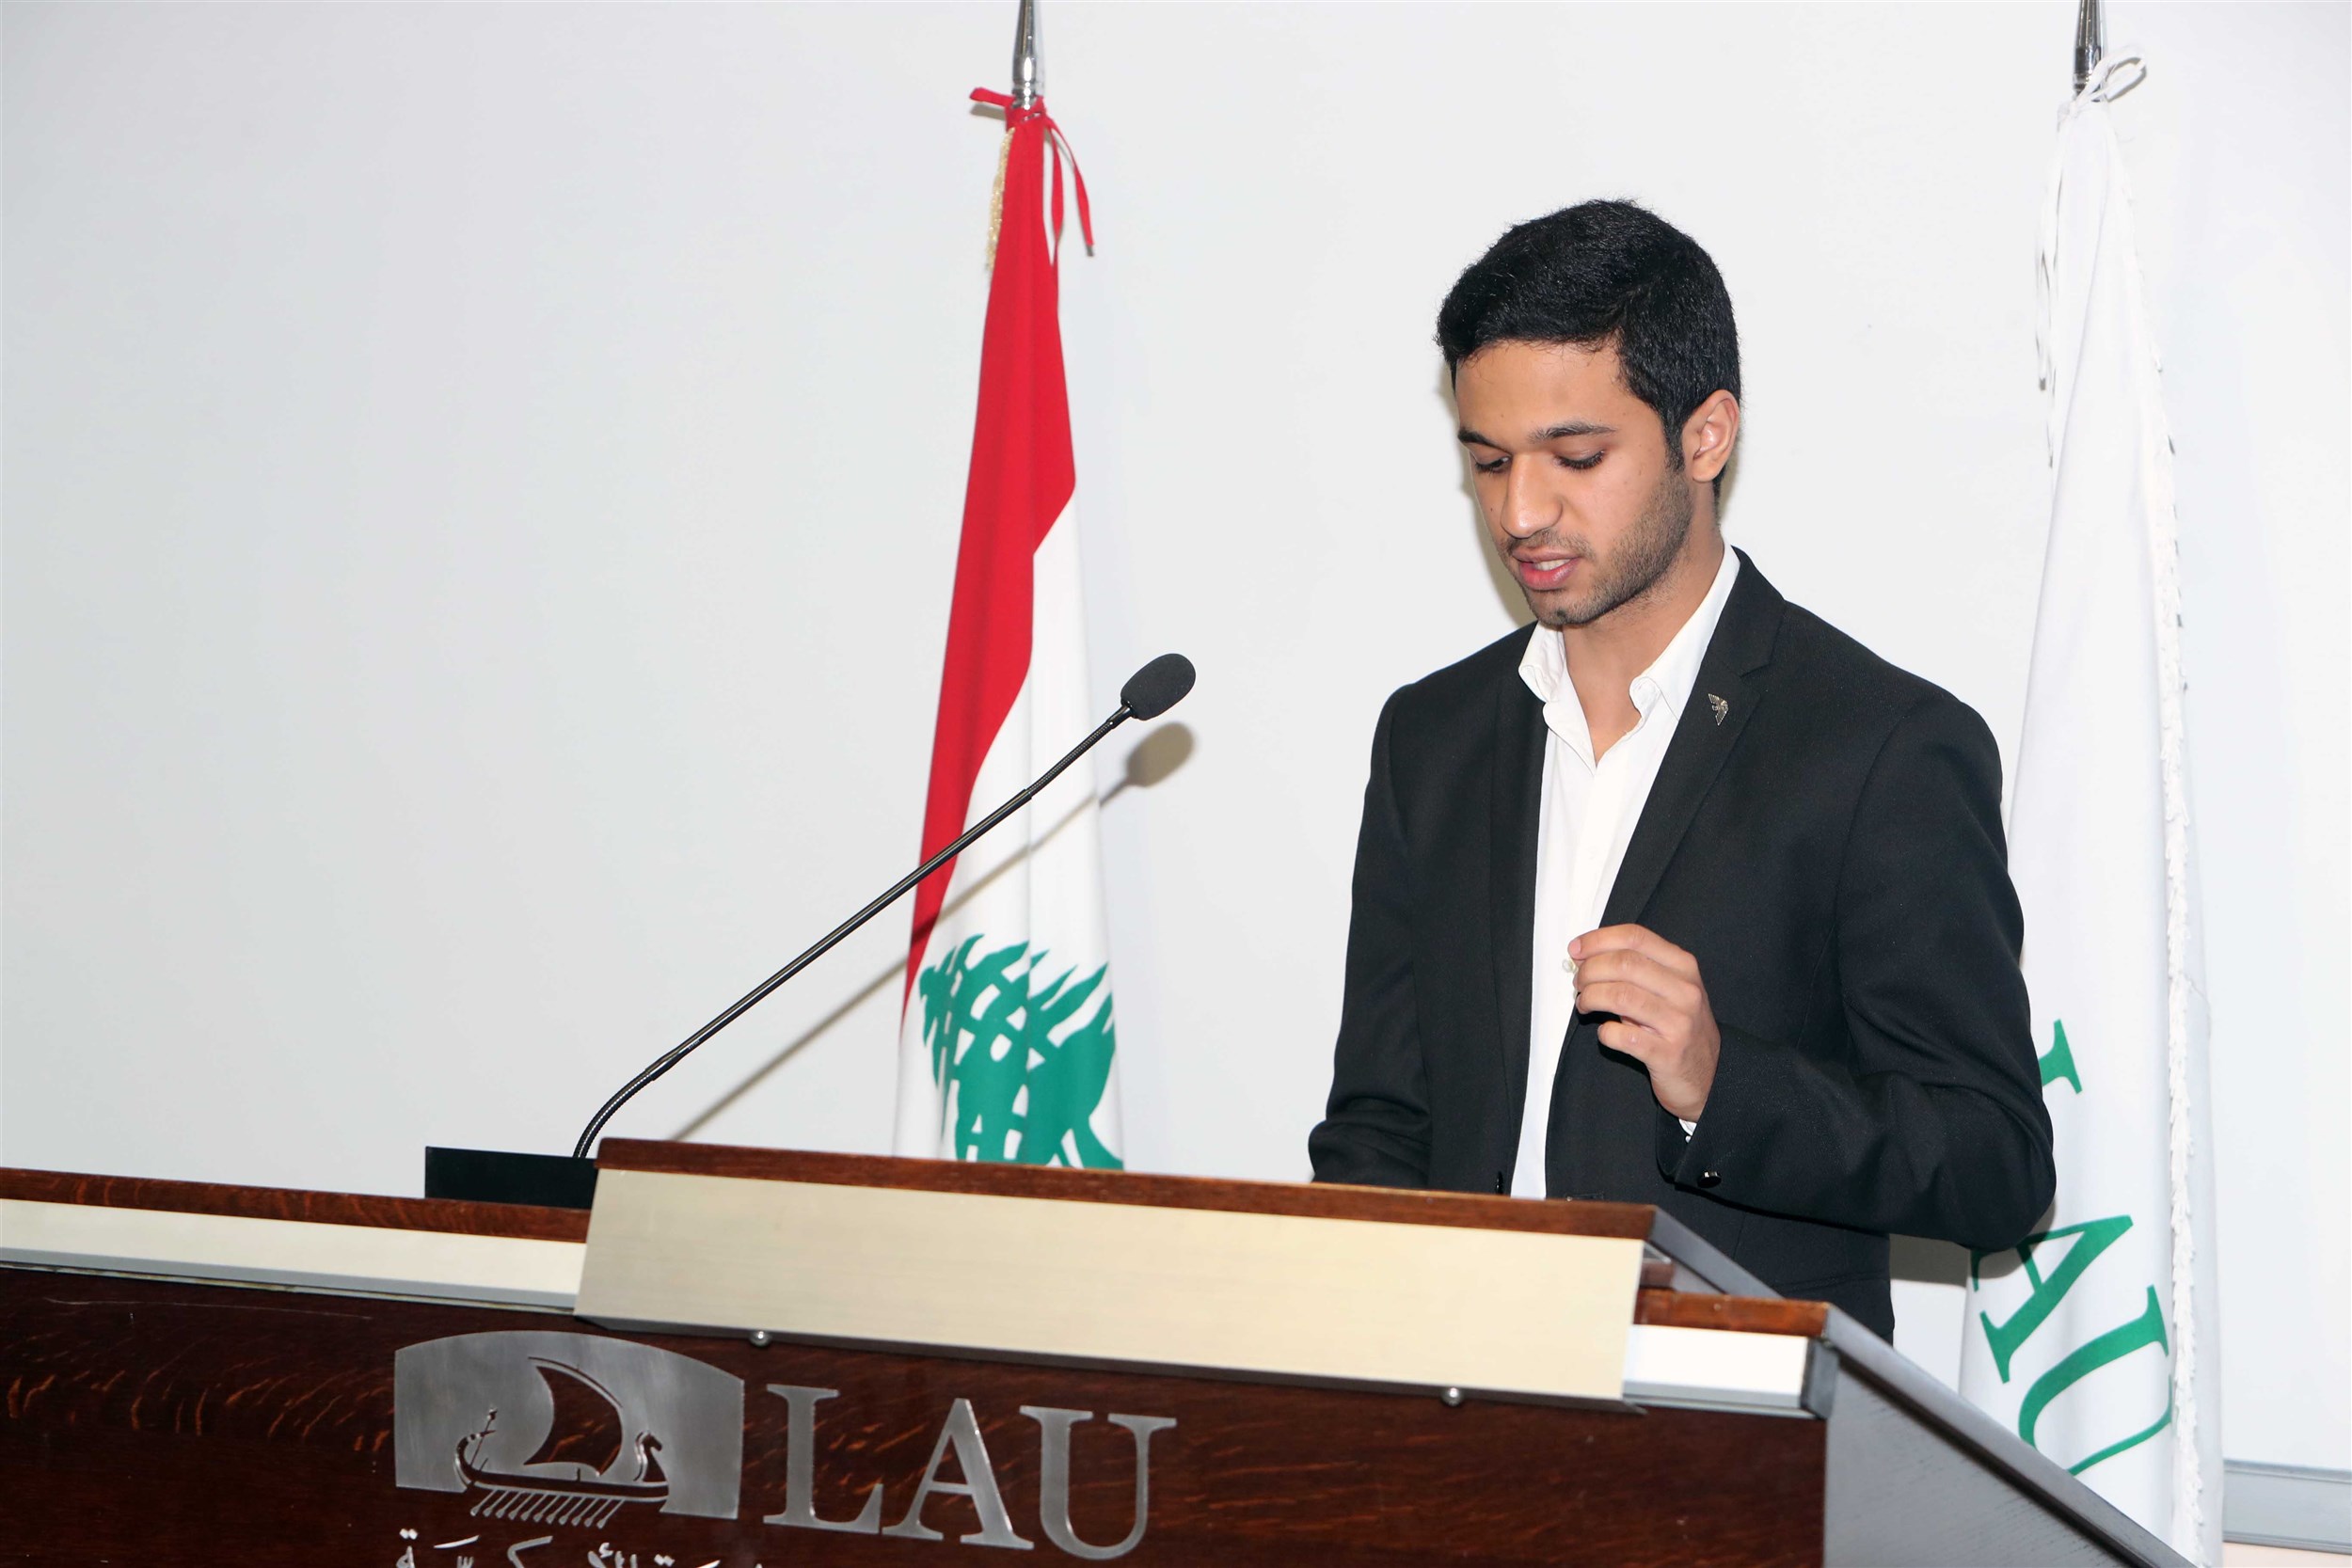 one of the participating students pitching his idea for the jury.